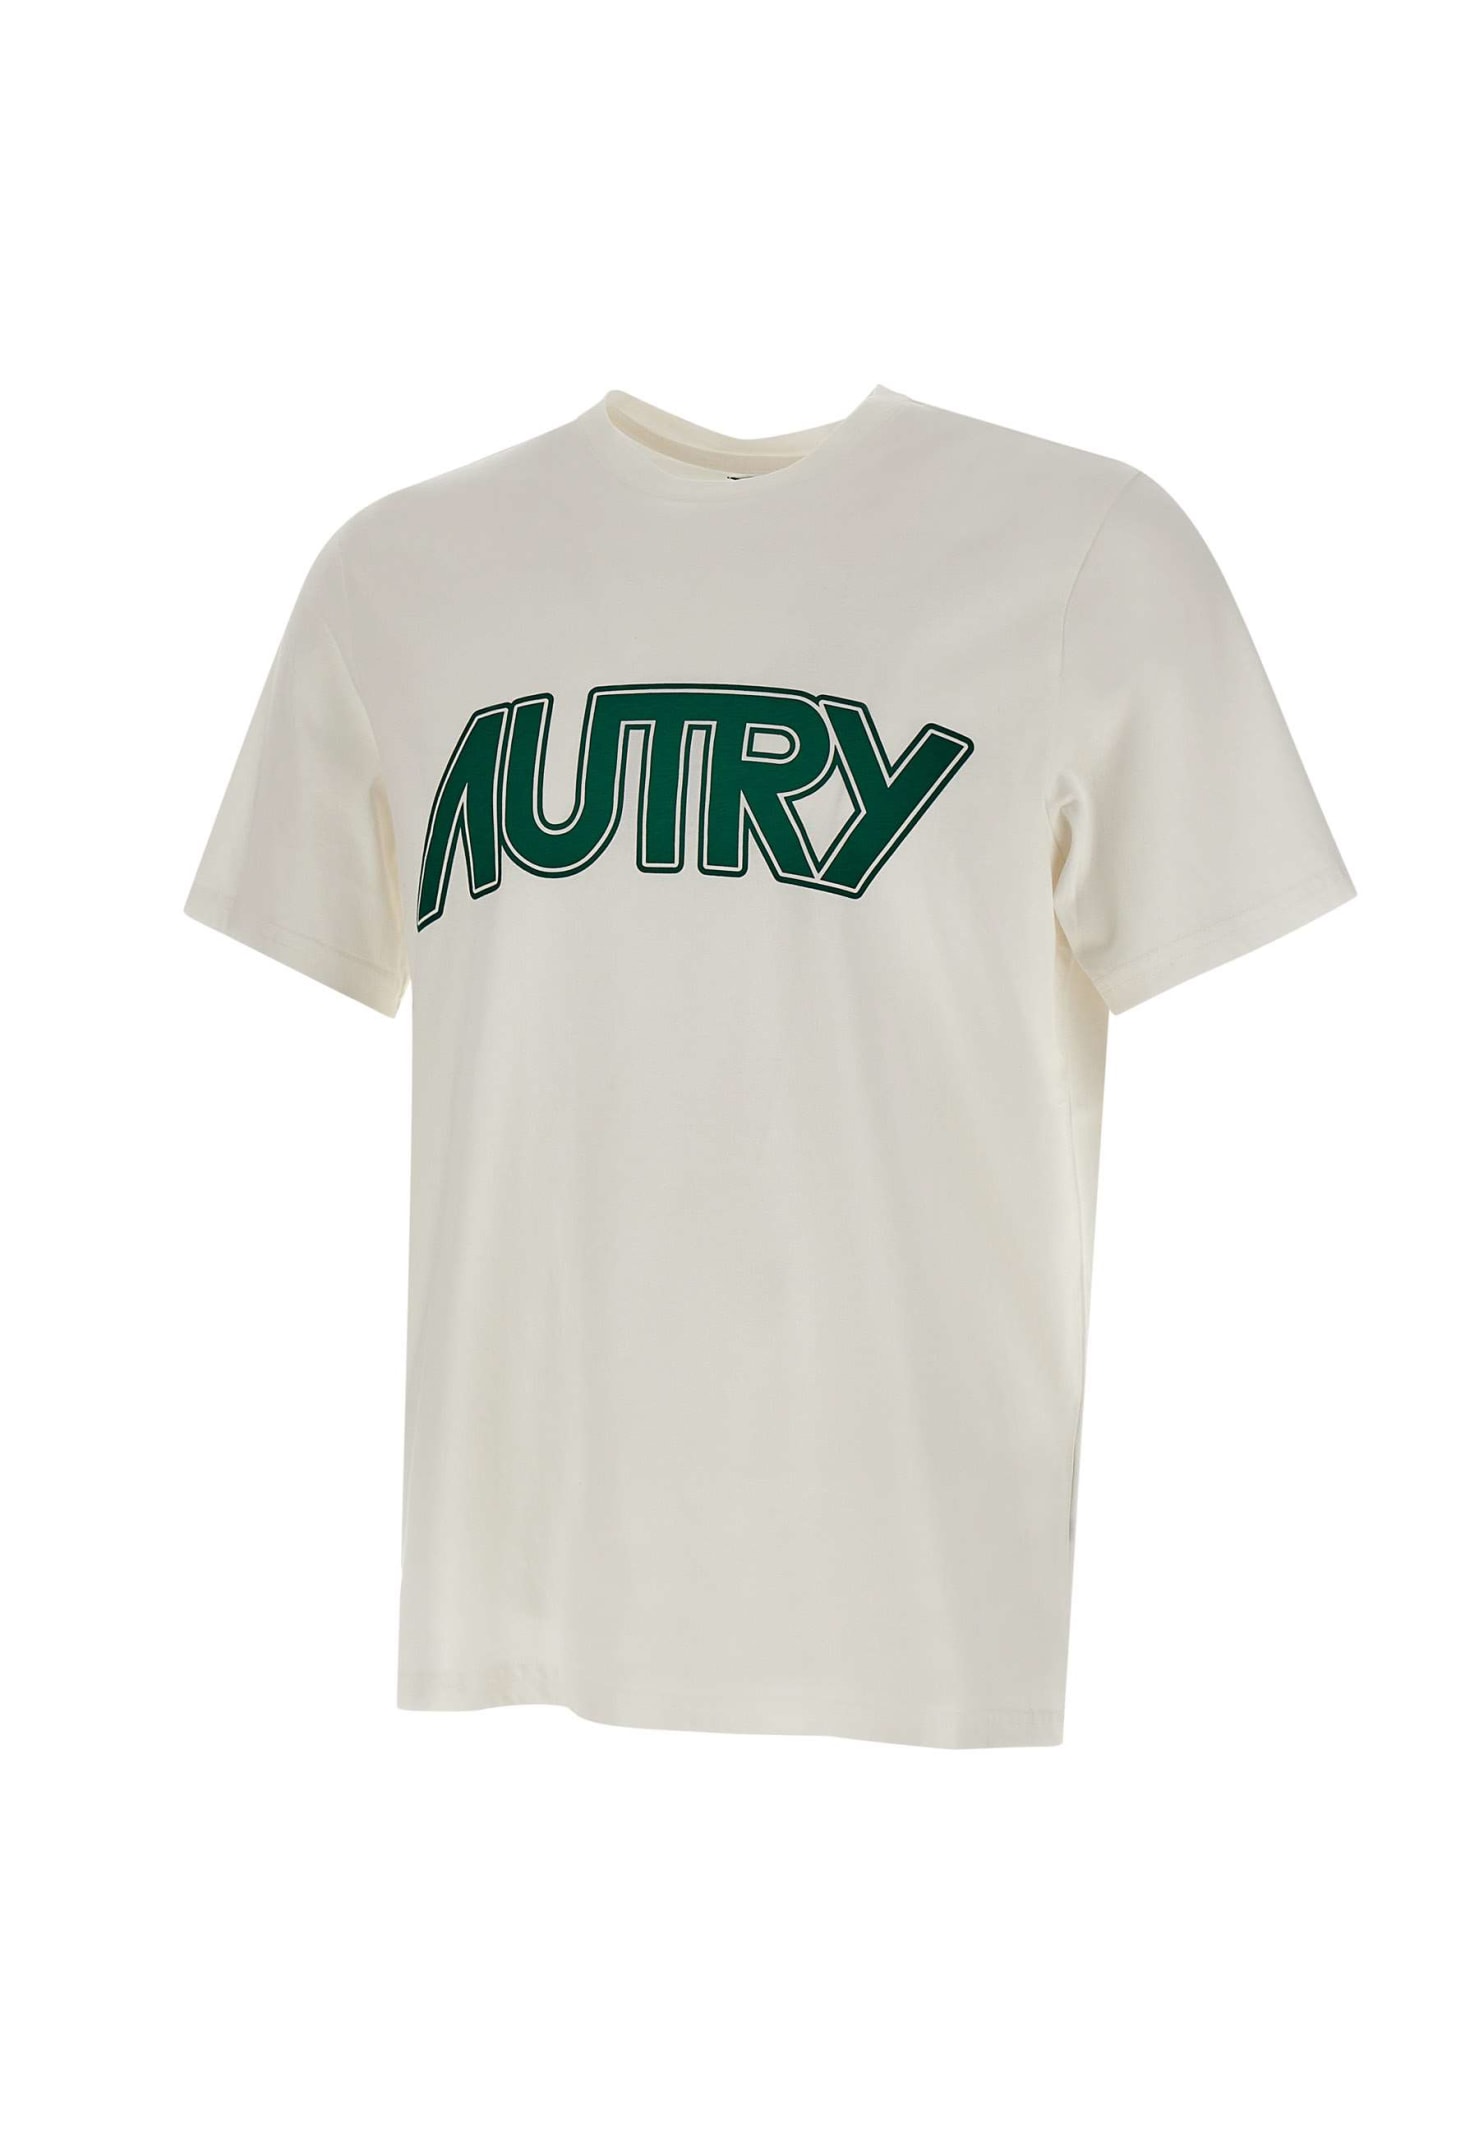 Autry Main Man Apparel Cotton T-shirt In White